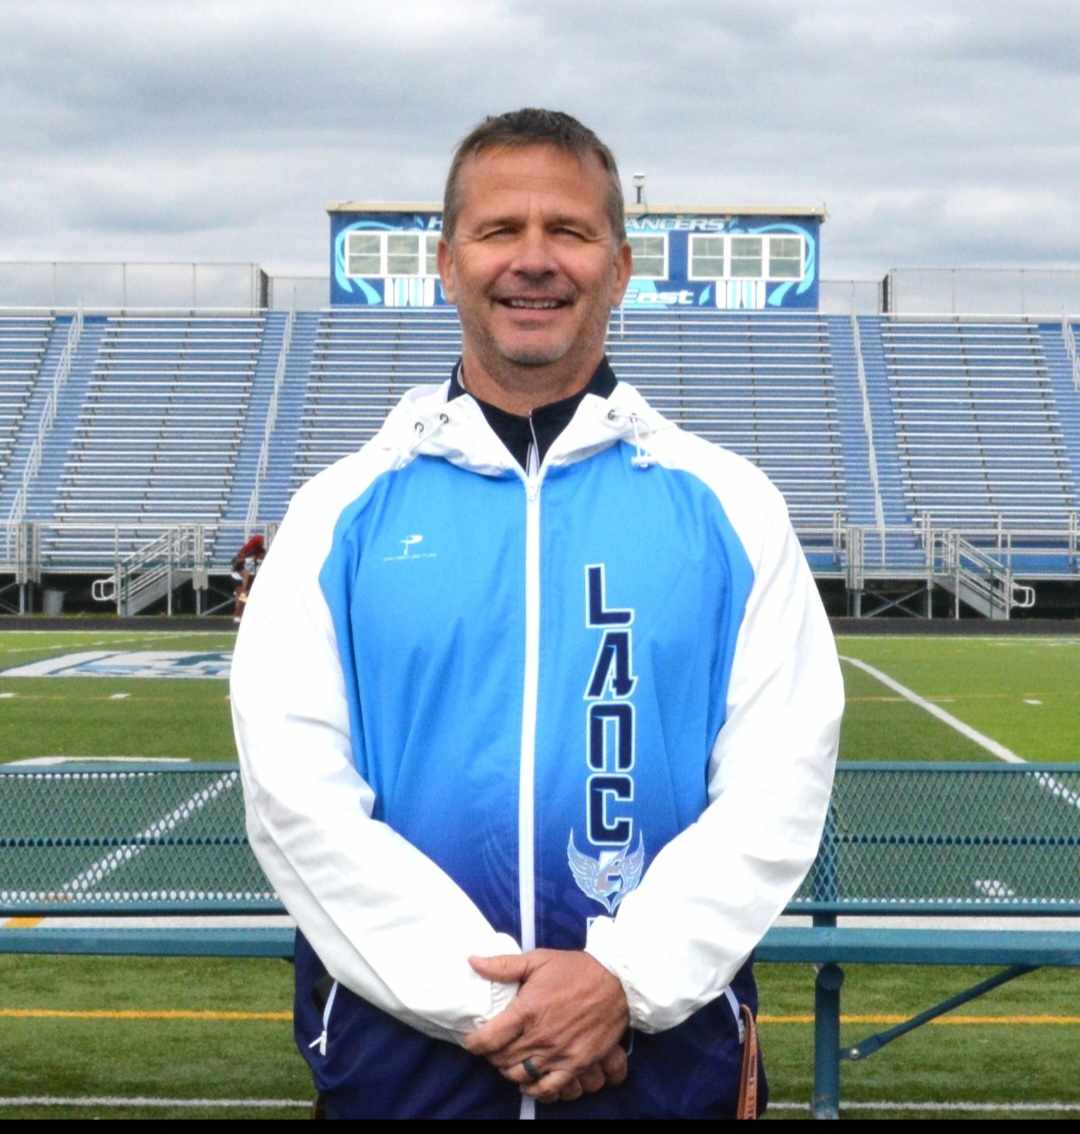 The track and field team would like to thank coach Jim Loyet for the 23 years he dedicated to the program. His faithfulness and encouragement to these young men will be missed. Let's hear it for Coach Loyet as he enjoys retirement from coaching!
@be